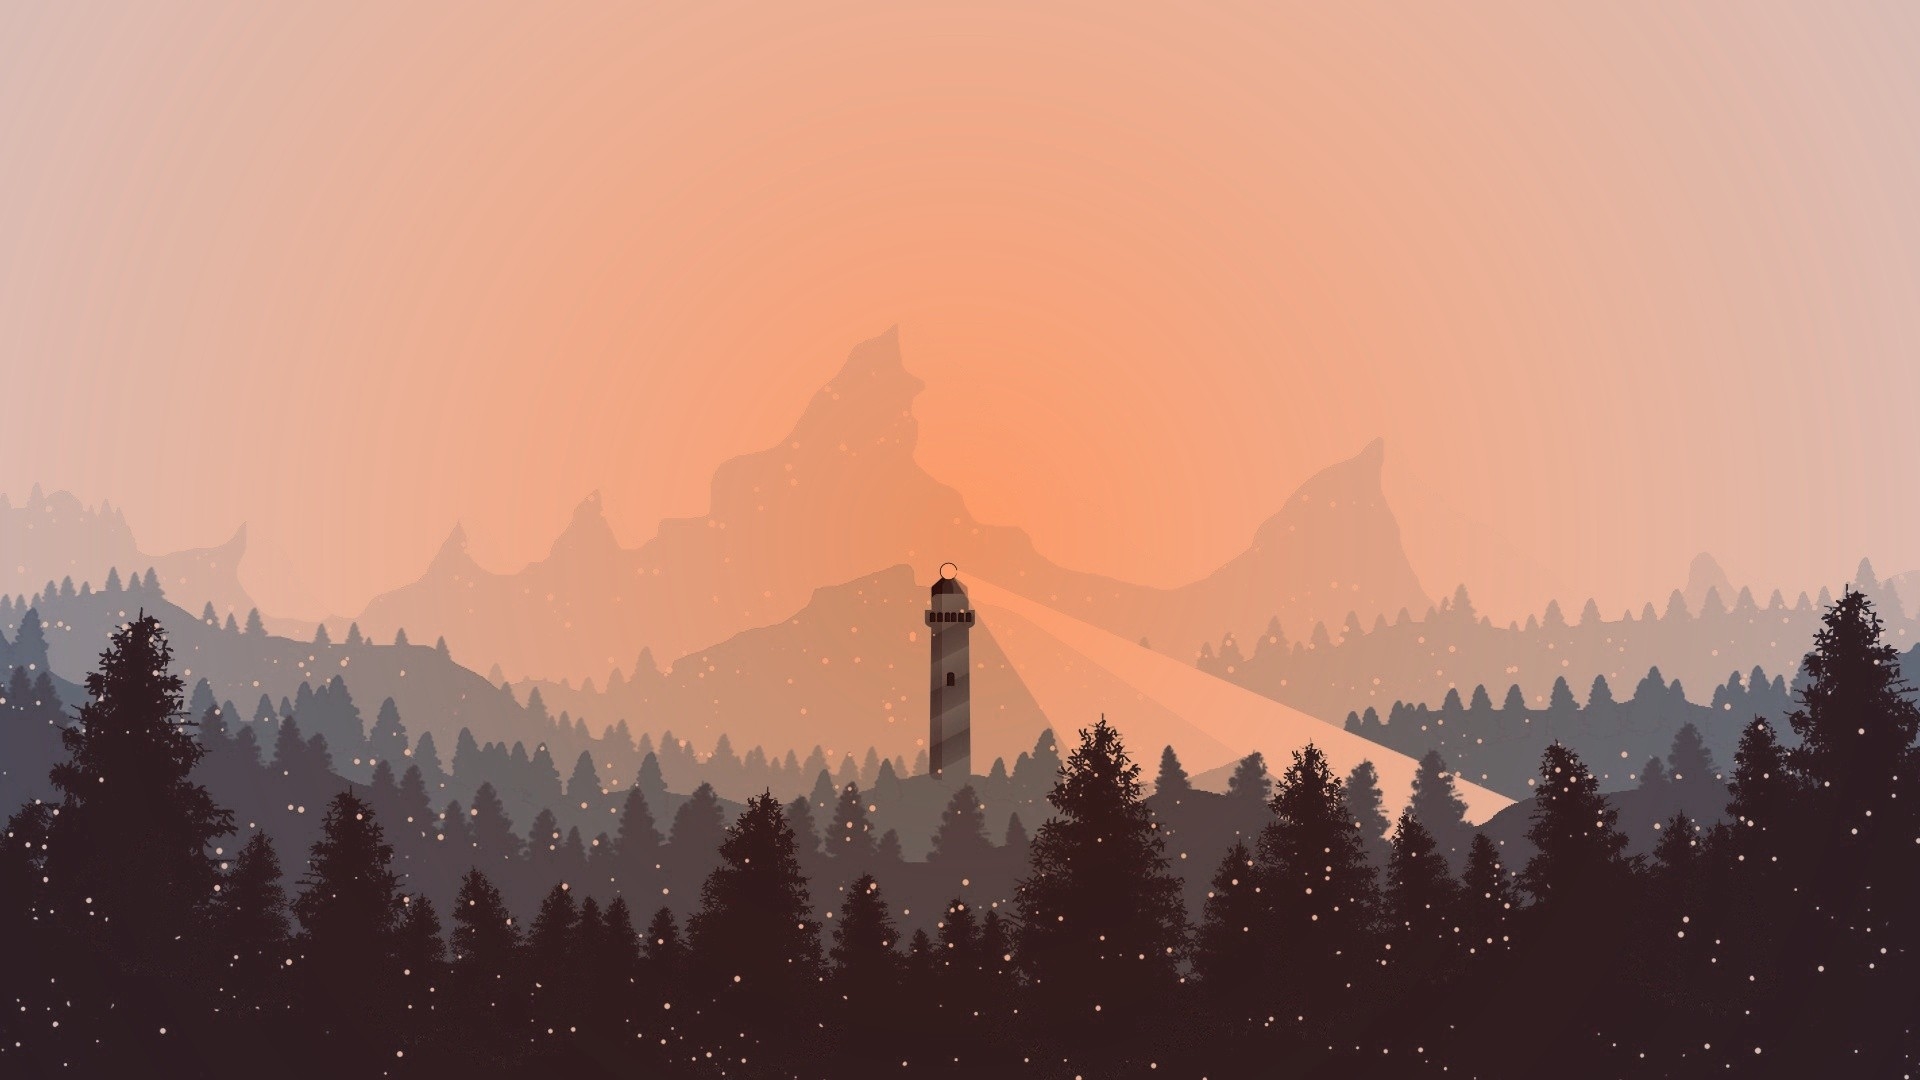 A lighthouse on a hill surrounded by trees - Snow